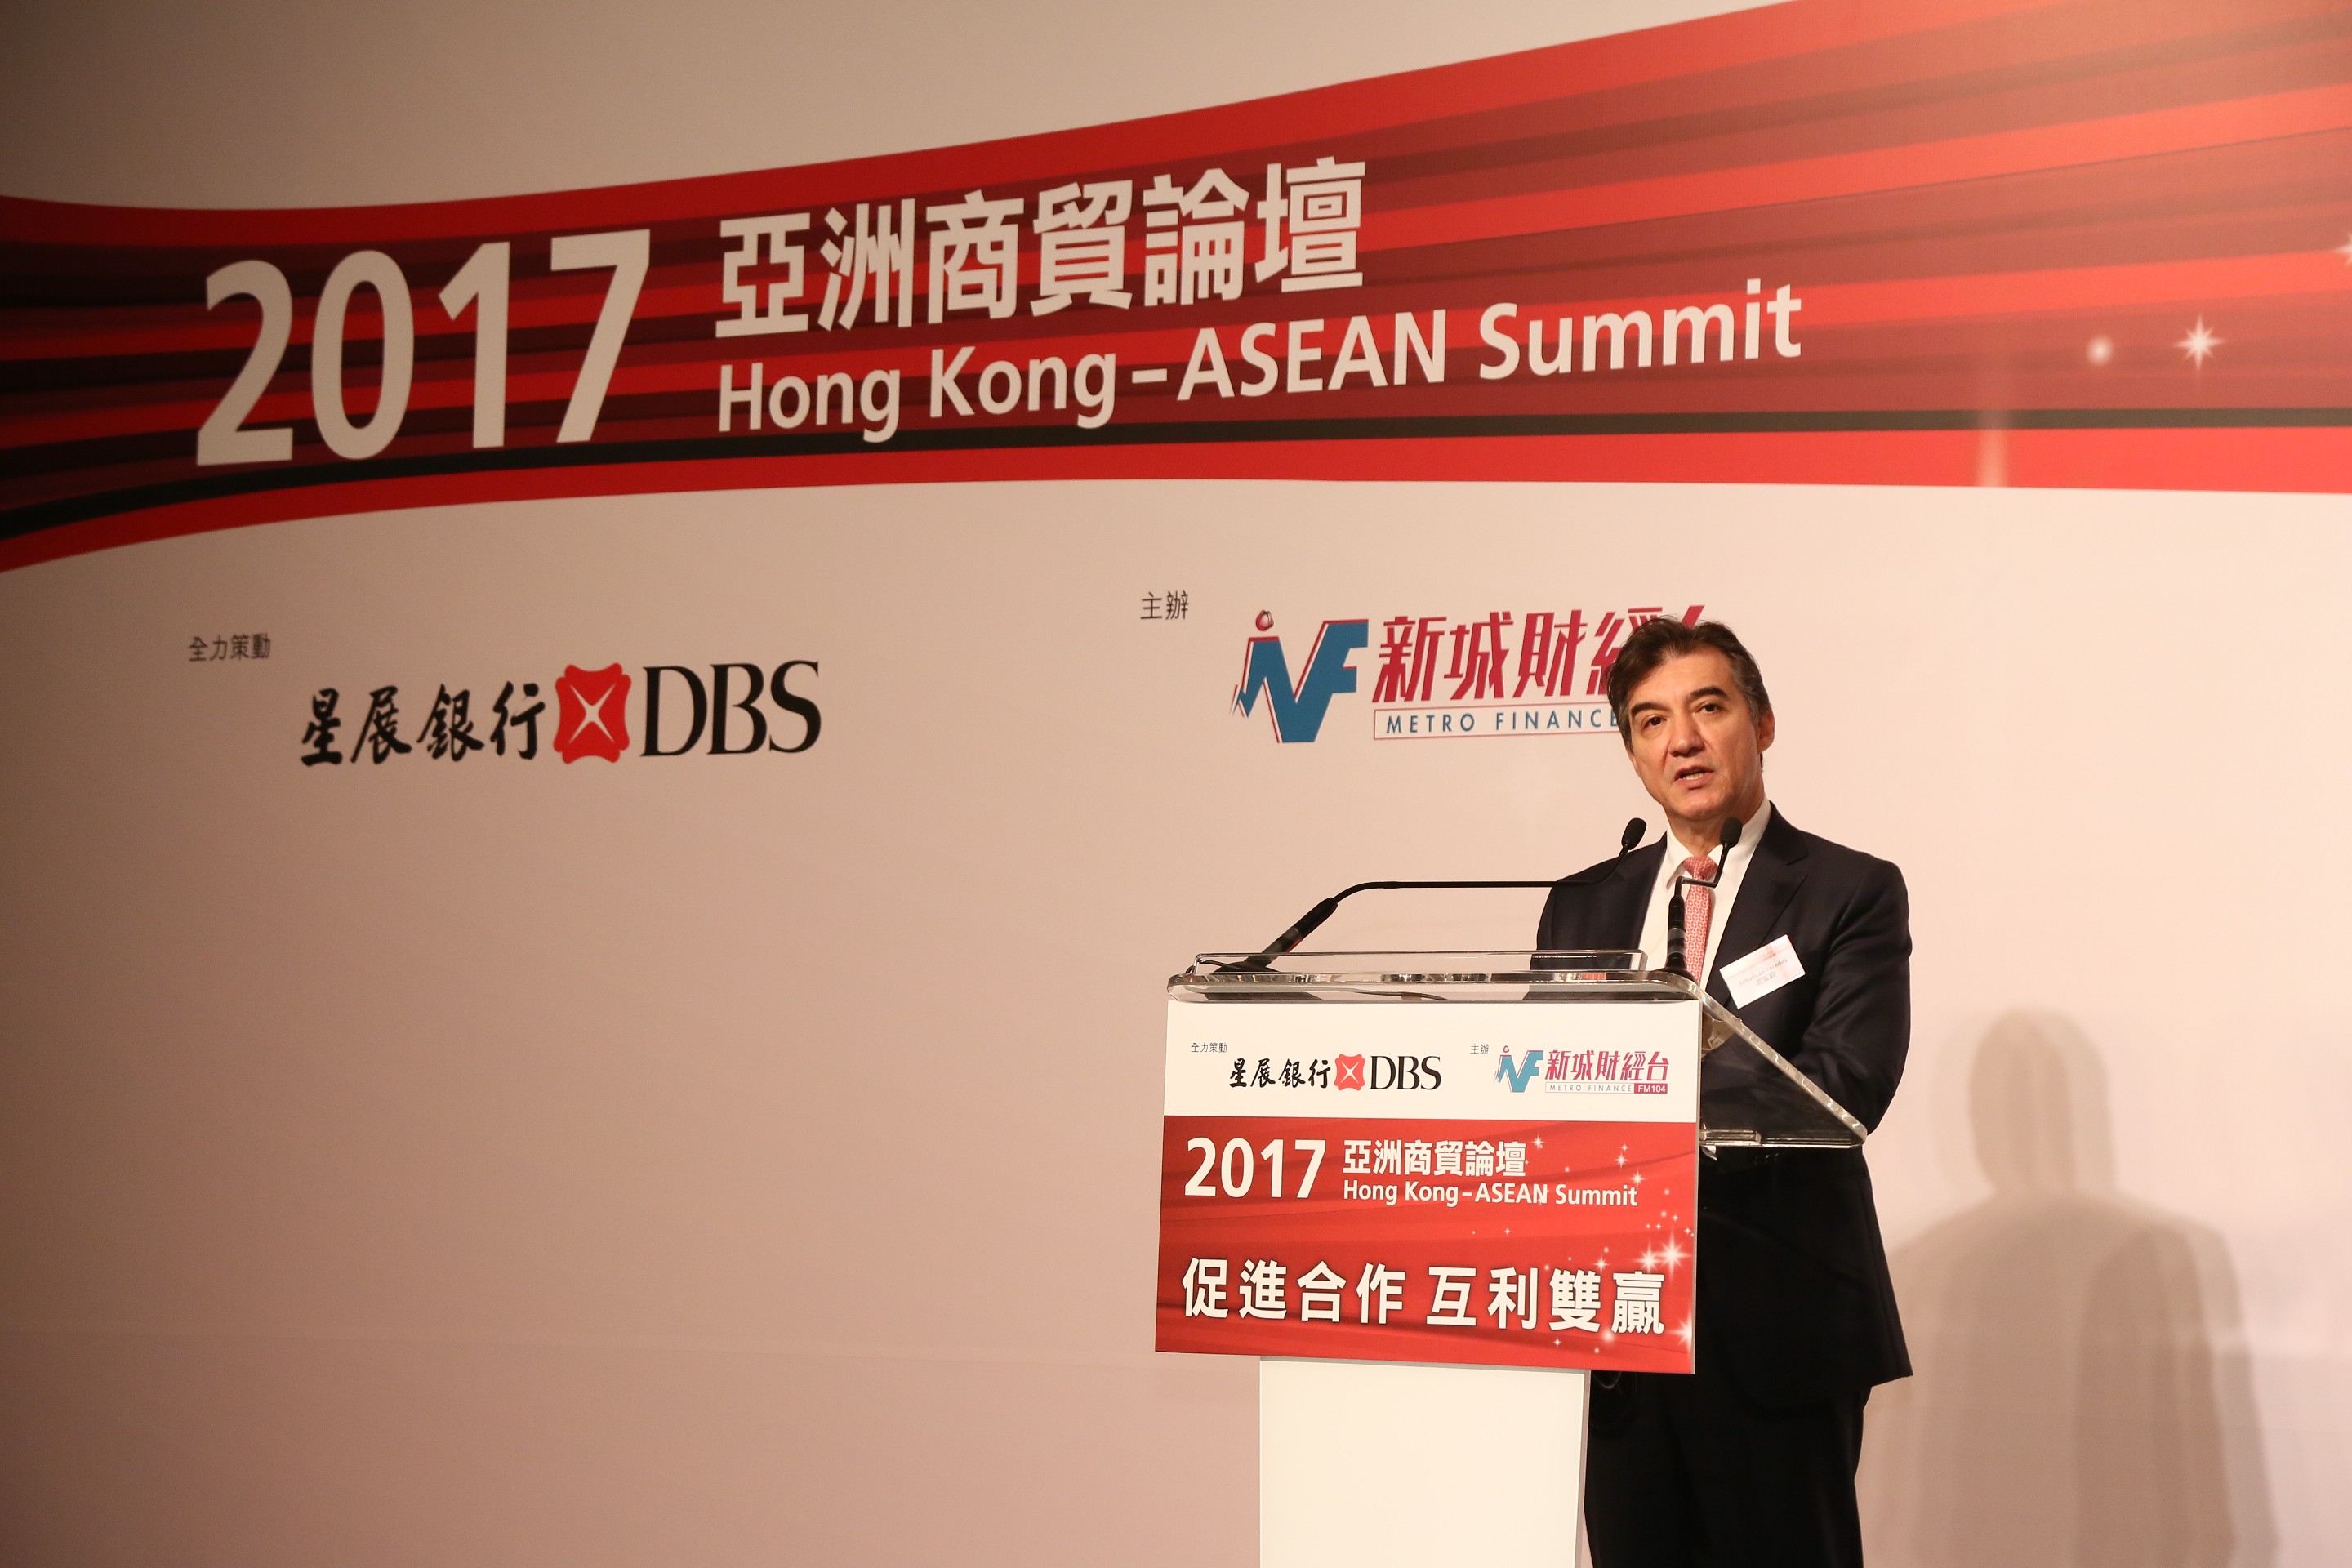 Photo 3: Mr. Sebastian Paredes, Chief Executive Officer, DBS Bank (Hong Kong) Limited, said, "DBS has been supporting the development of a number of infrastructure projects. Through our strong regional contacts in Asia and our insight into the market, we believe that DBS can work with customers to benefit from the Belt and Road initiative with various opportunities and to build the future together."